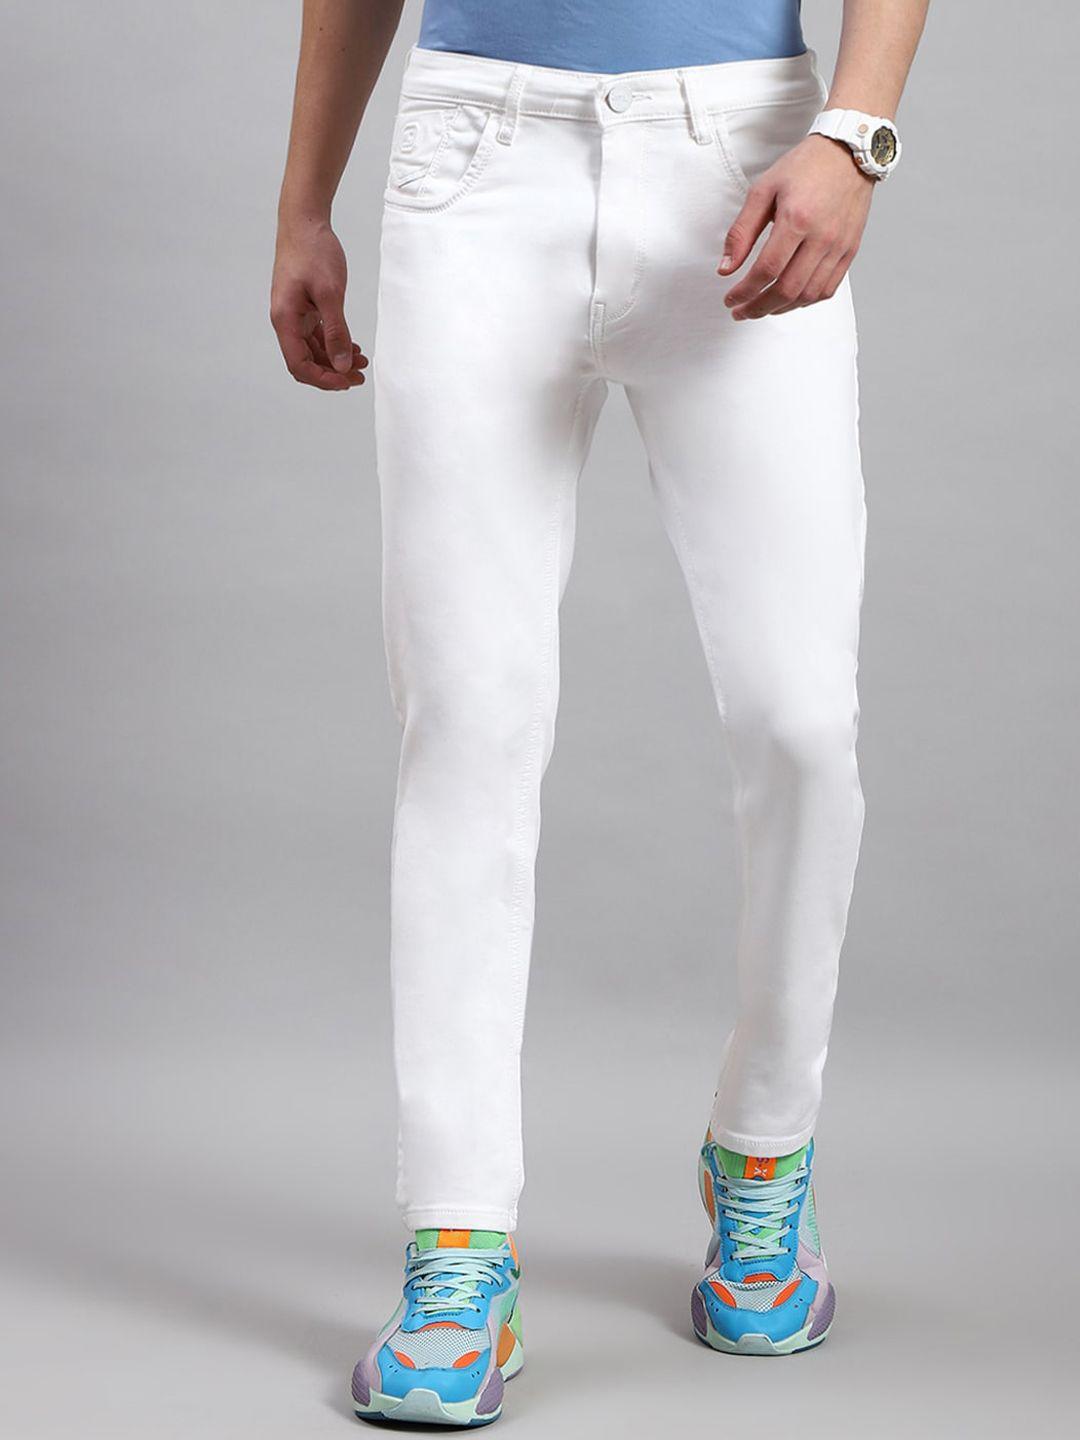 monte-carlo-slim-fit-mid-rise-clean-look-cotton-jeans